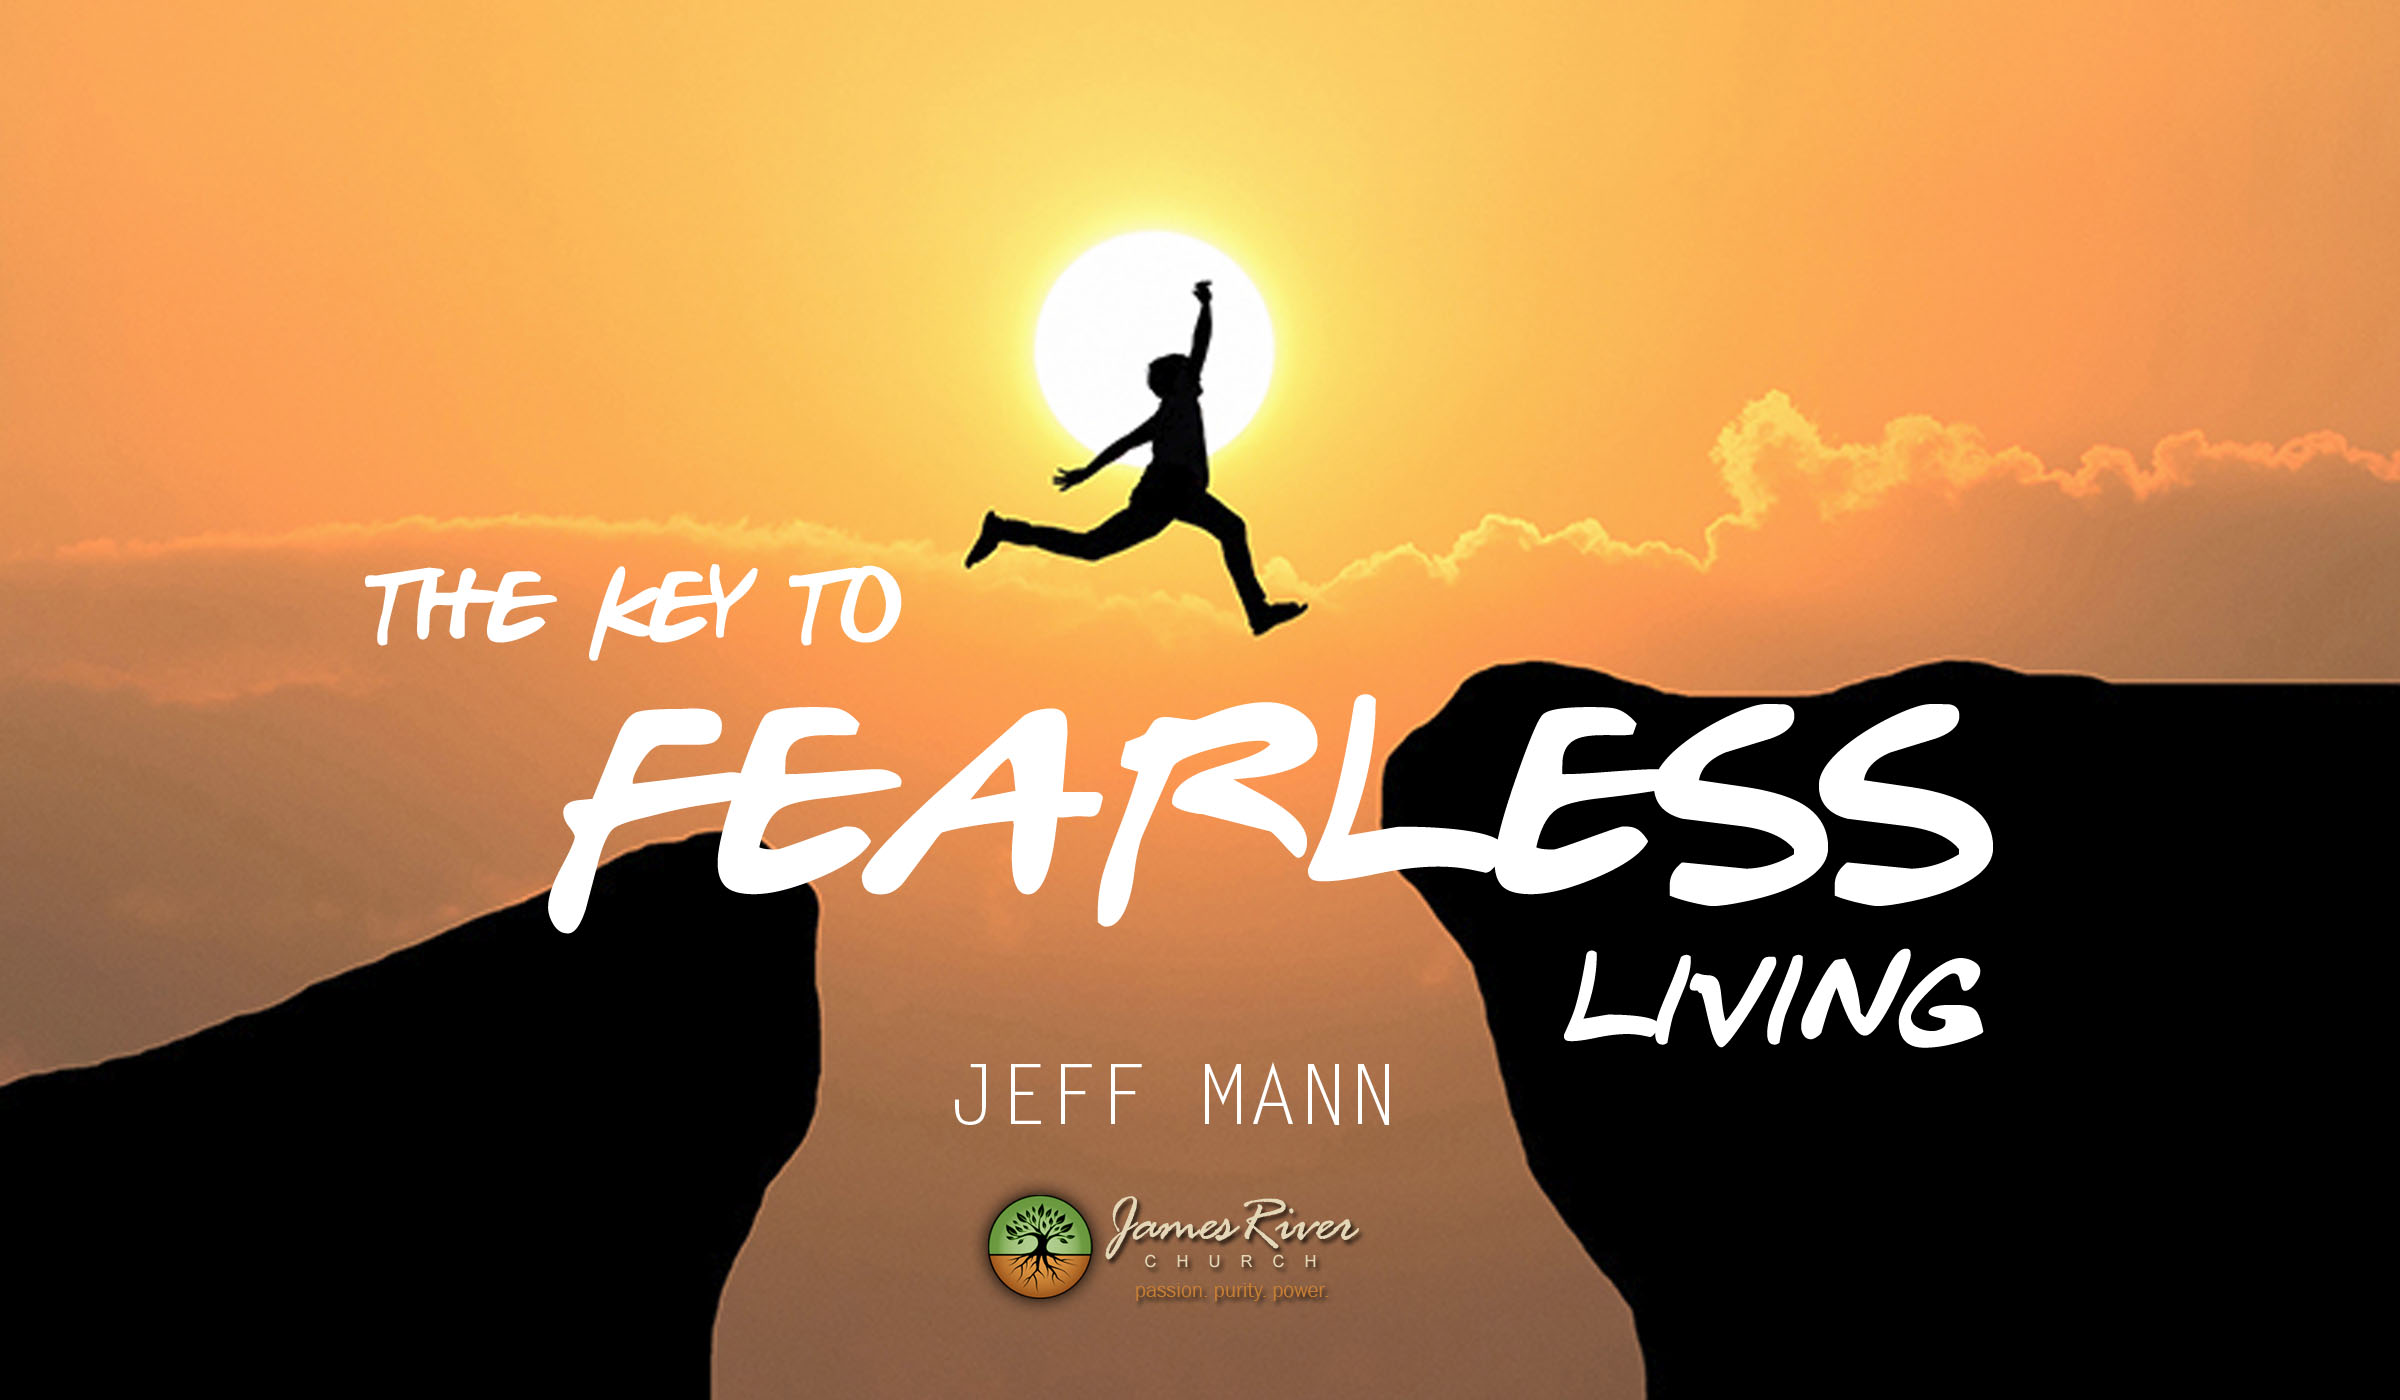 The Key To Fearless Living